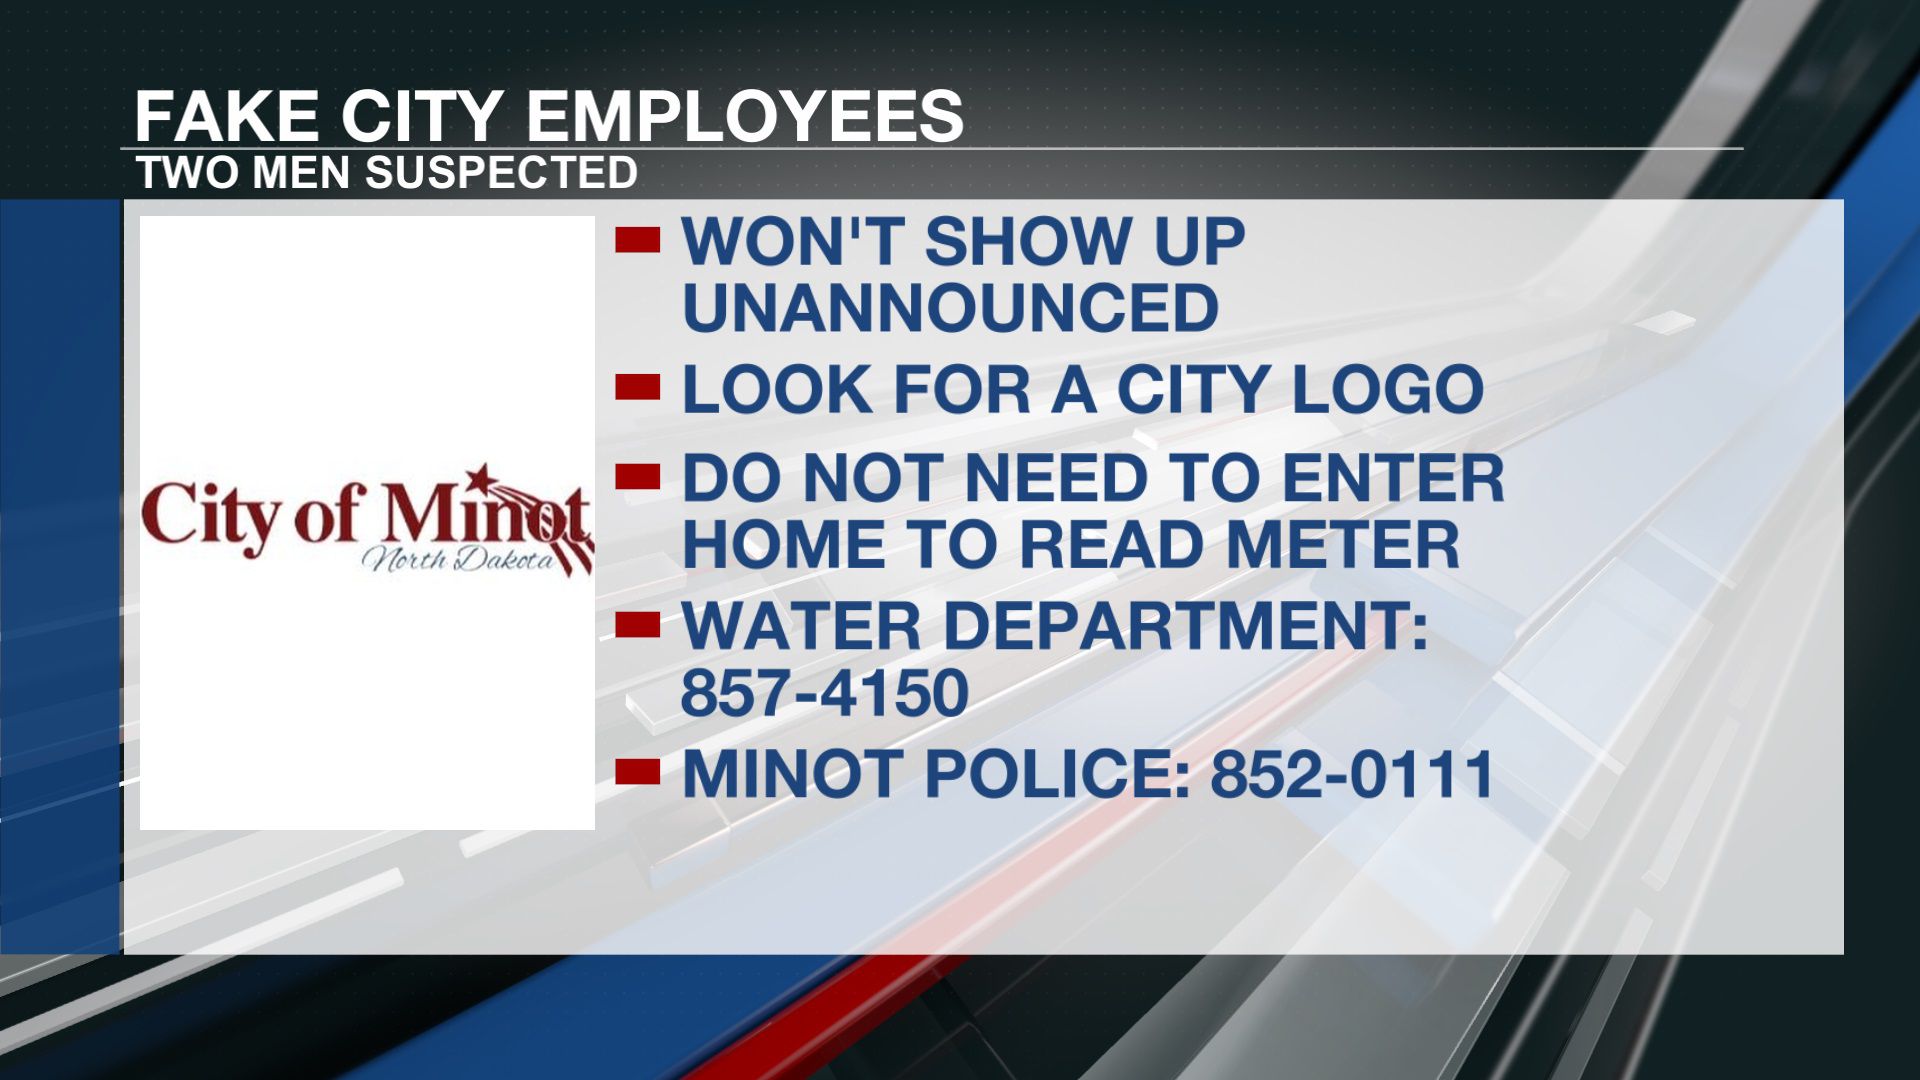 City of Minot warns of people posing as city employees